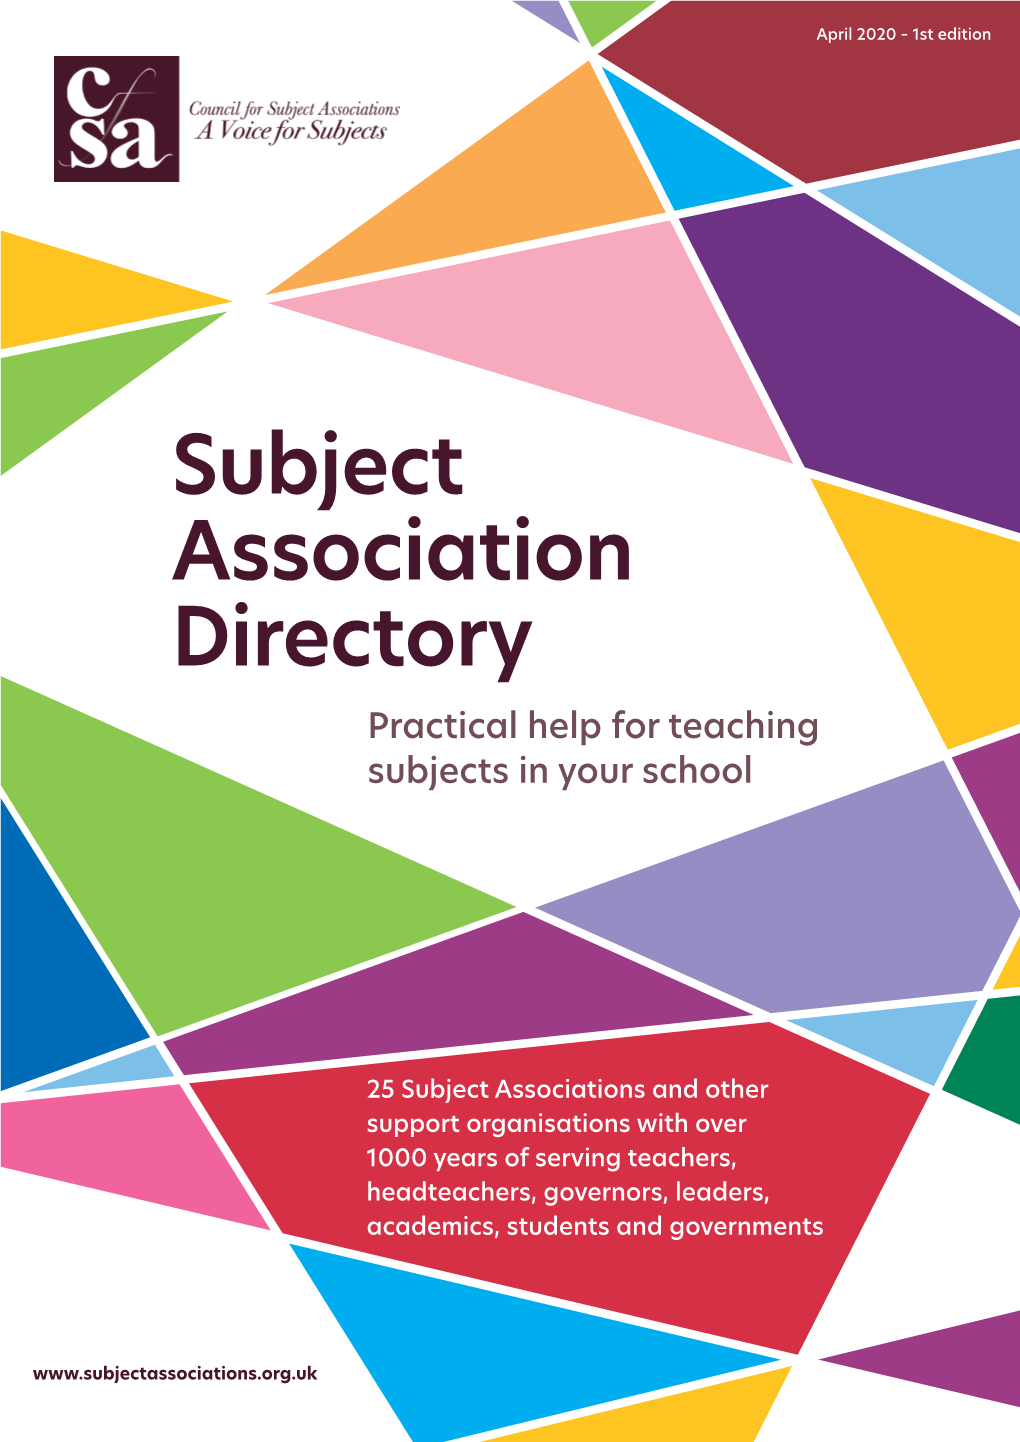 Subject Association Directory Practical Help for Teaching Subjects in Your School